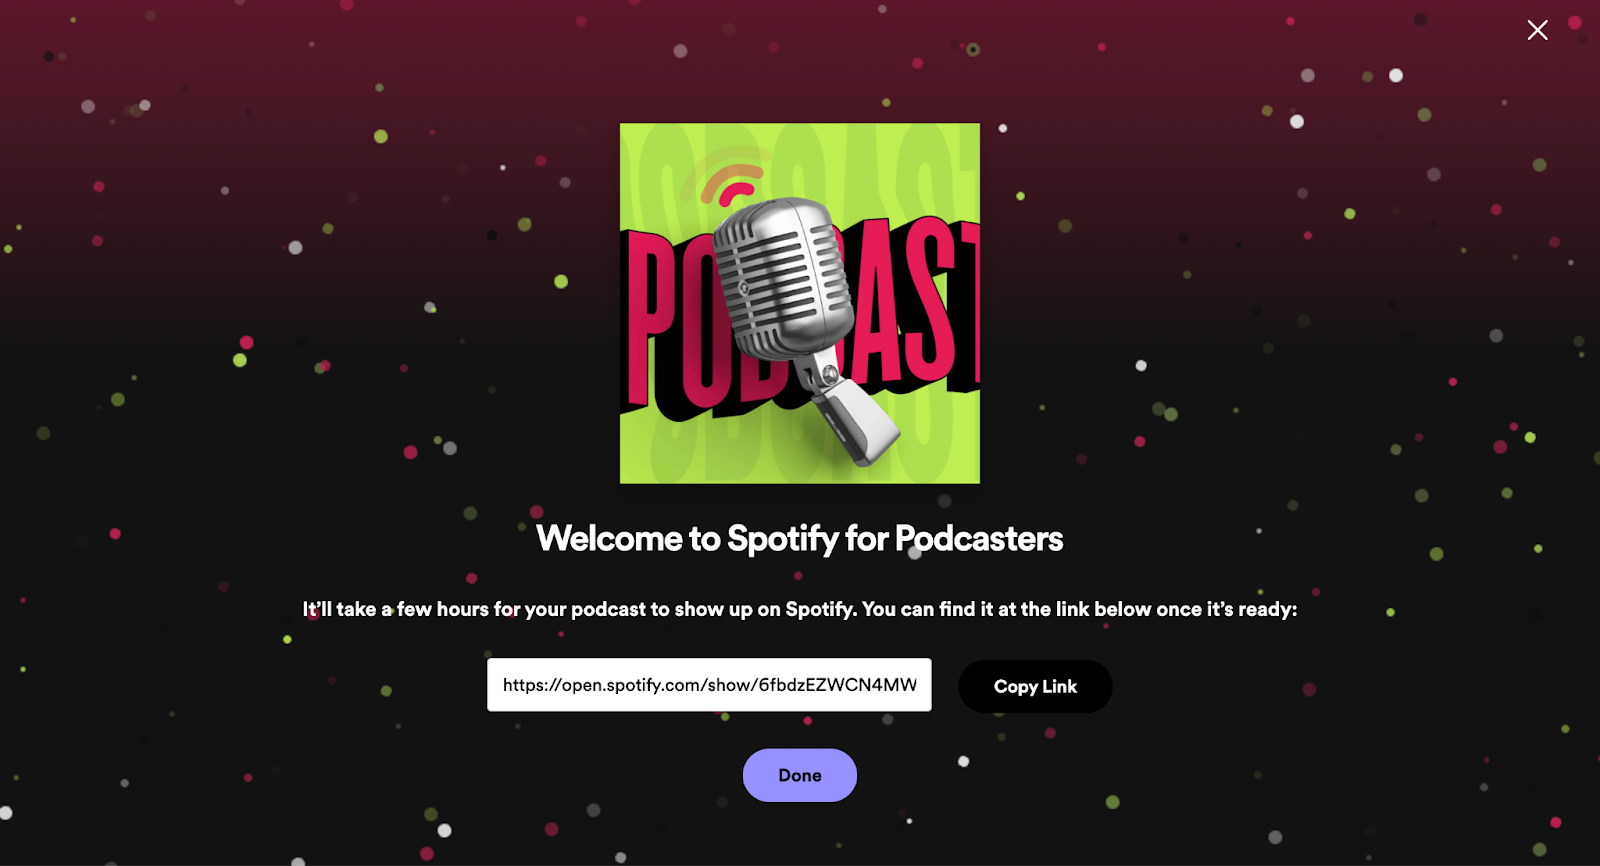 How To Submit A Podcast To Spotify